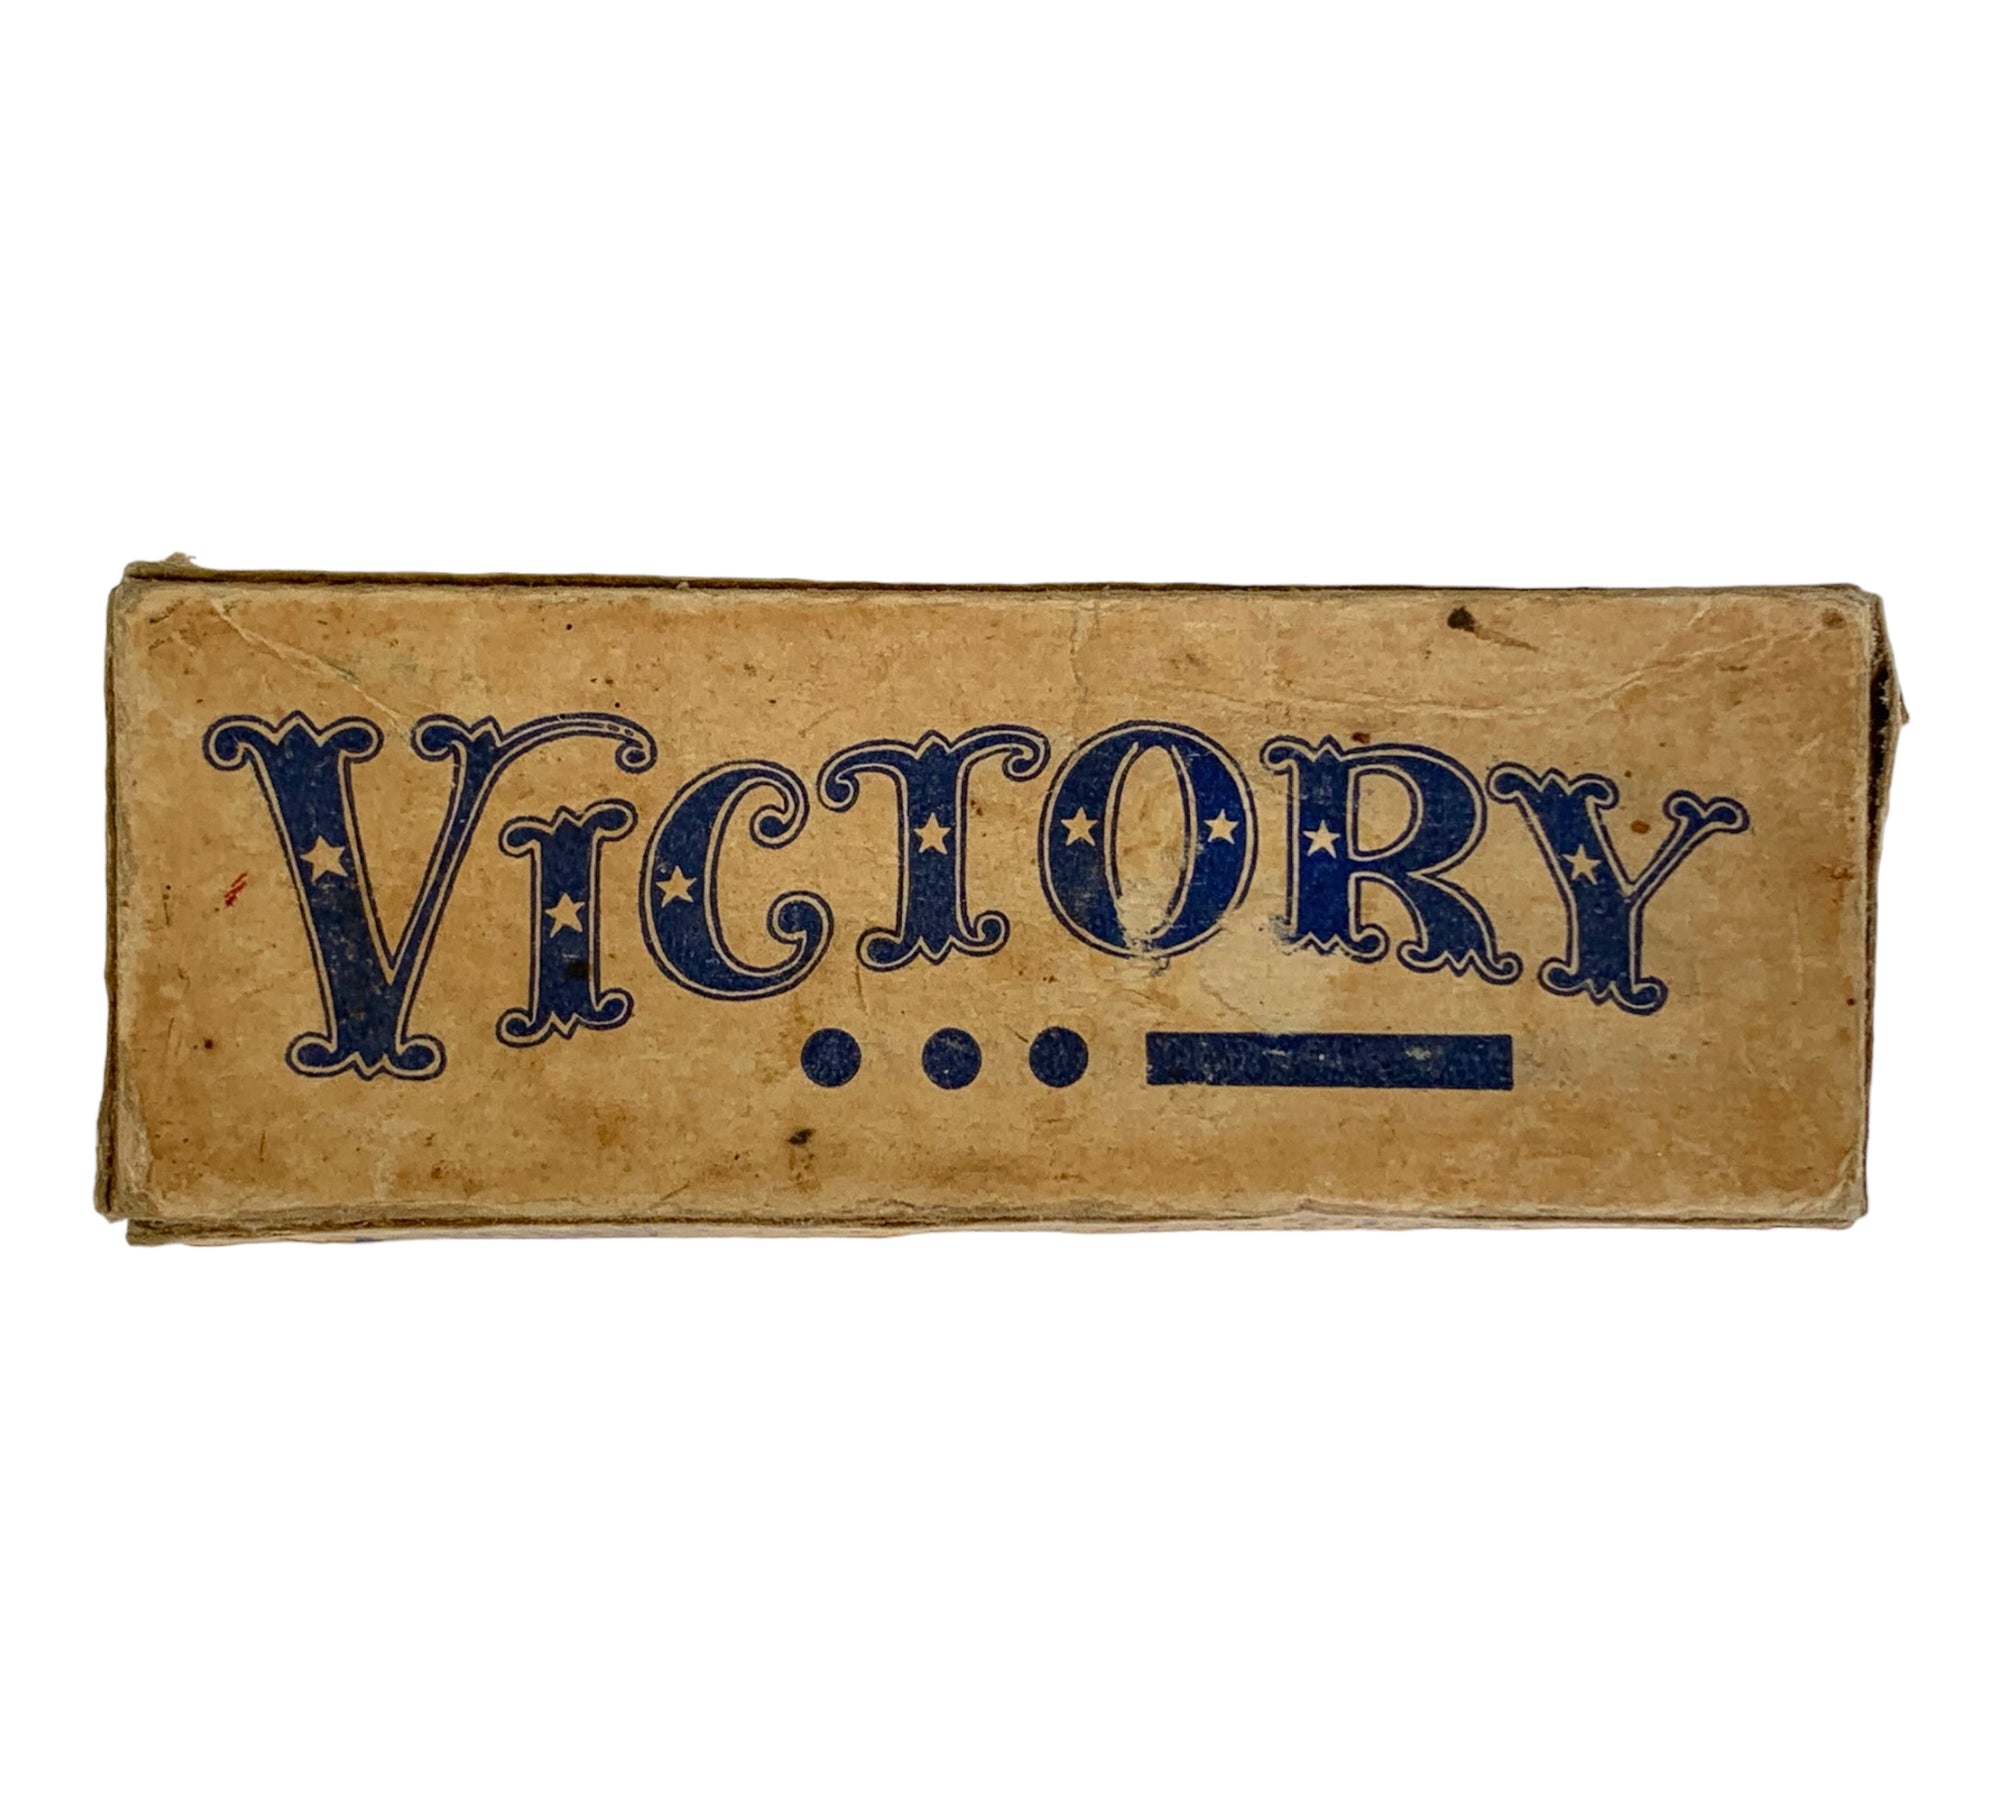 WWII Era EGER BAIT COMPANY VICTORY Vintage Fishing Lure Box – Toad